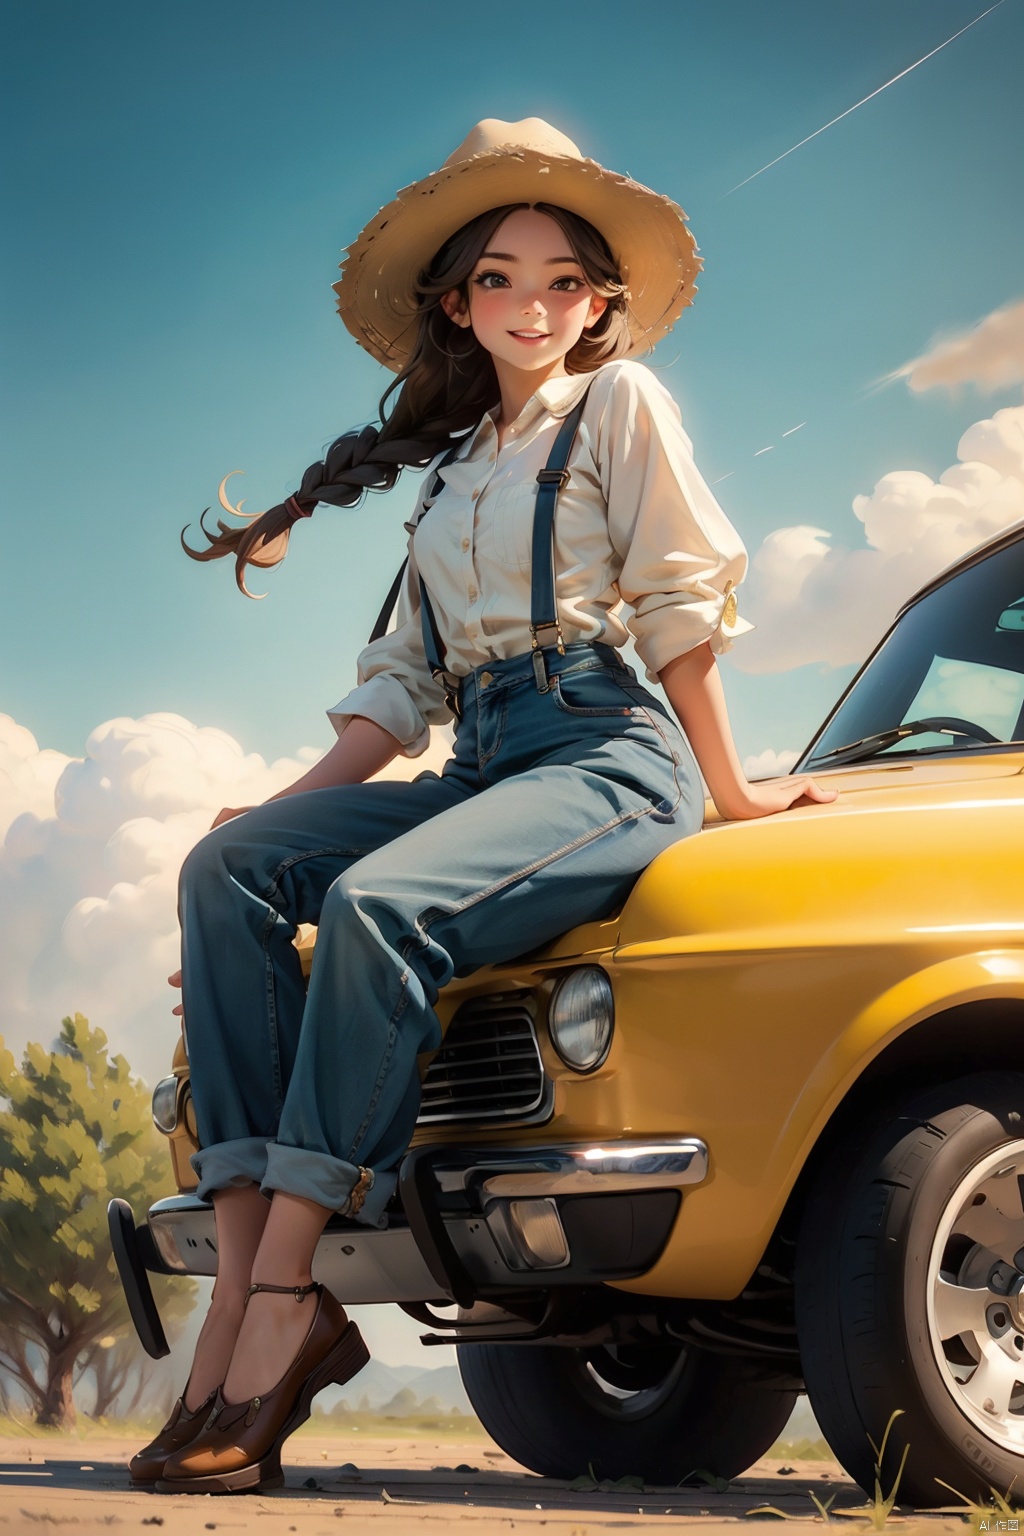 masterpiece, best quality, 8K,illustration, colorful, The rich visuals depict the joy of outdoor travel. car  Vacation girl, a girl wearing black suspenders and jeans, This is a very thin girl, not very plump, Black Fried Dough Twists Braid and black eyes, Sitting on the ground with your back against a yellow car. Wearing a cowboy hat on the head , best qualityhighly detailed, realistic rendering, Cute Smiling Girl。This painting captures the essence of innocence, beauty, and joy, making it a beautiful and captivating artwork, Fully express the joy of the character's vacatin, The girl should be thinner, Girls' clothes should not be too revealing , Hair fluttering in the wind,Clearly display feet and hands